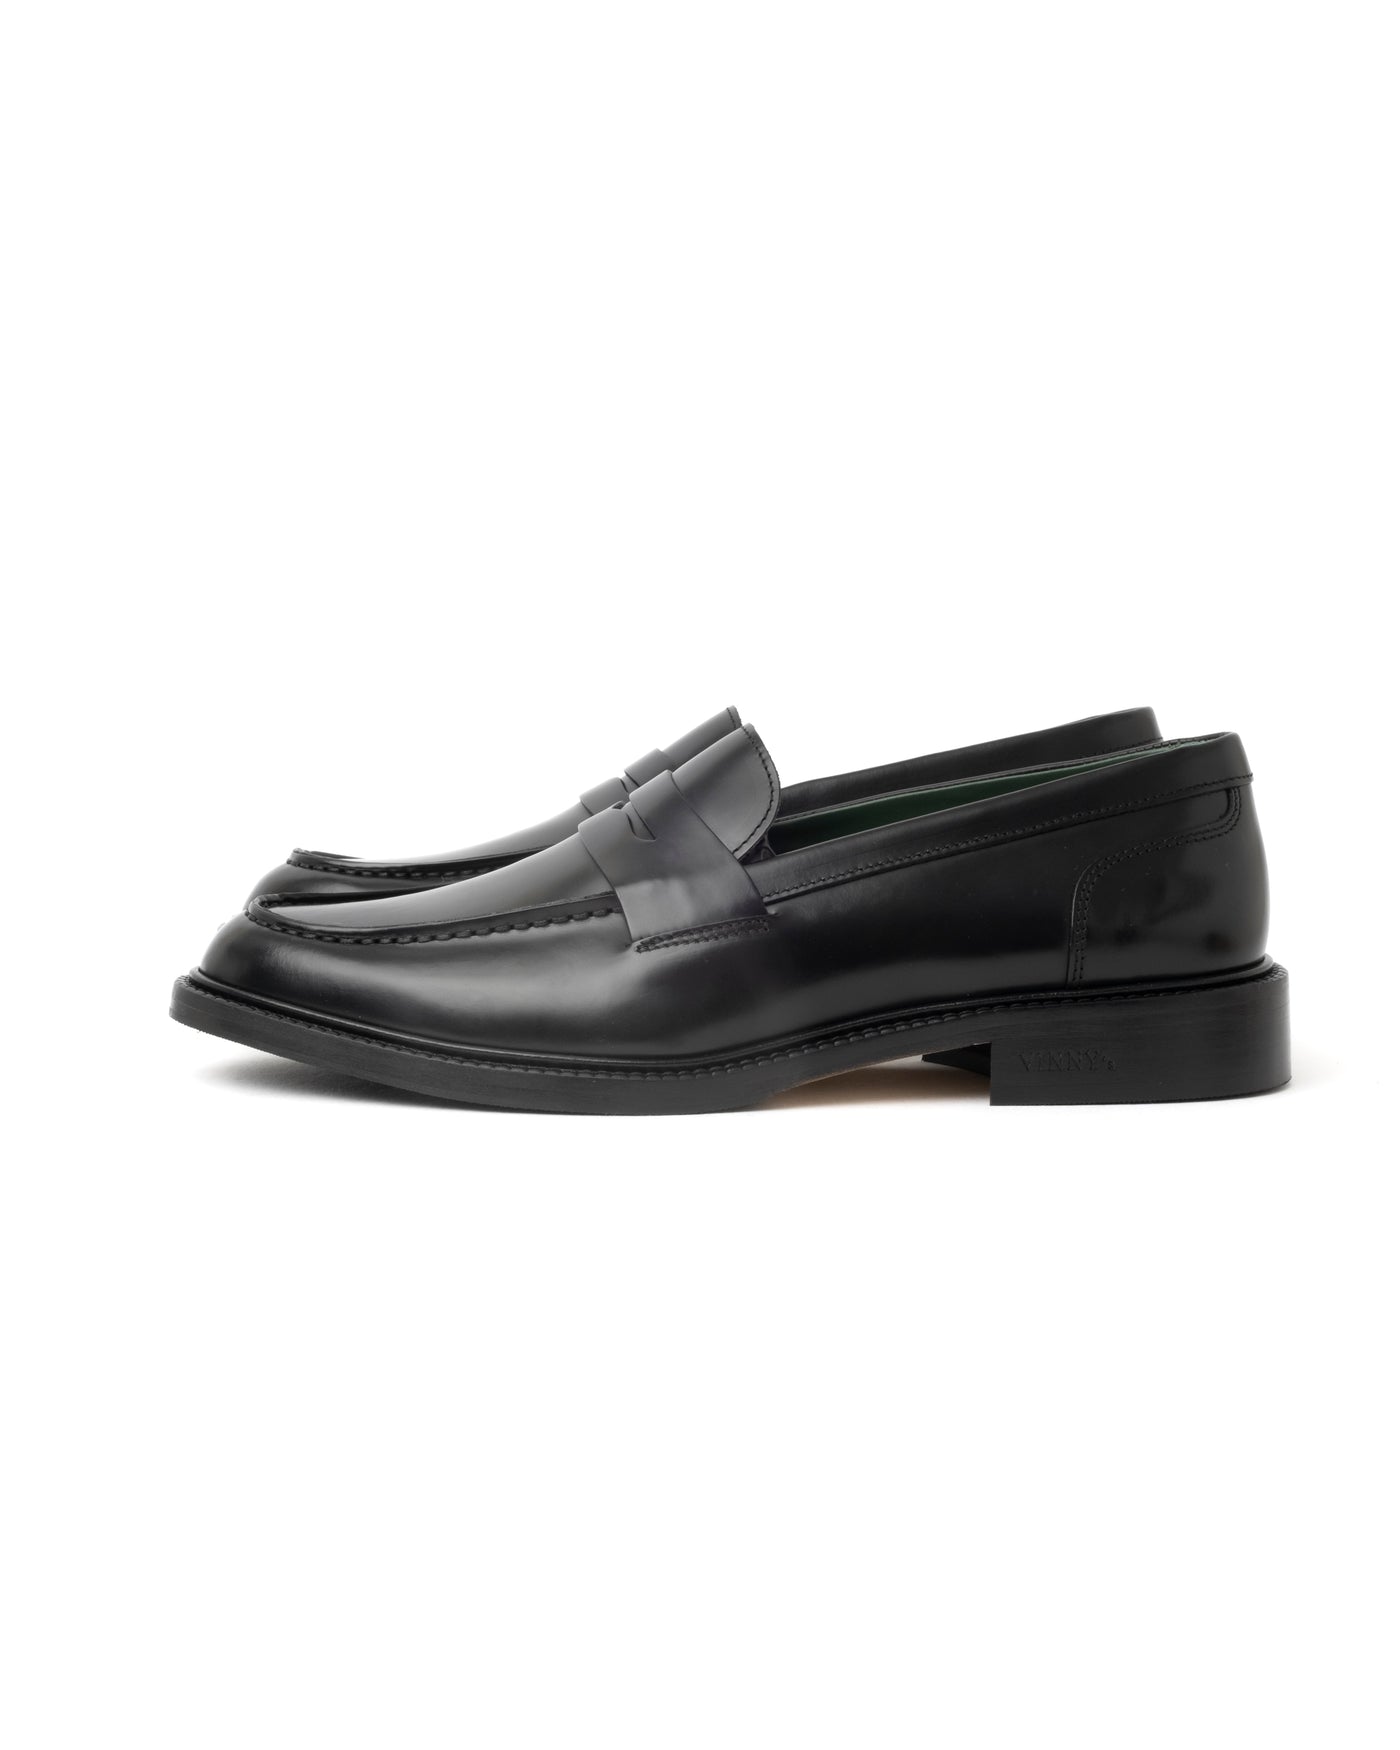 Vinny's Townee Penny Loafer Polido Leather Black